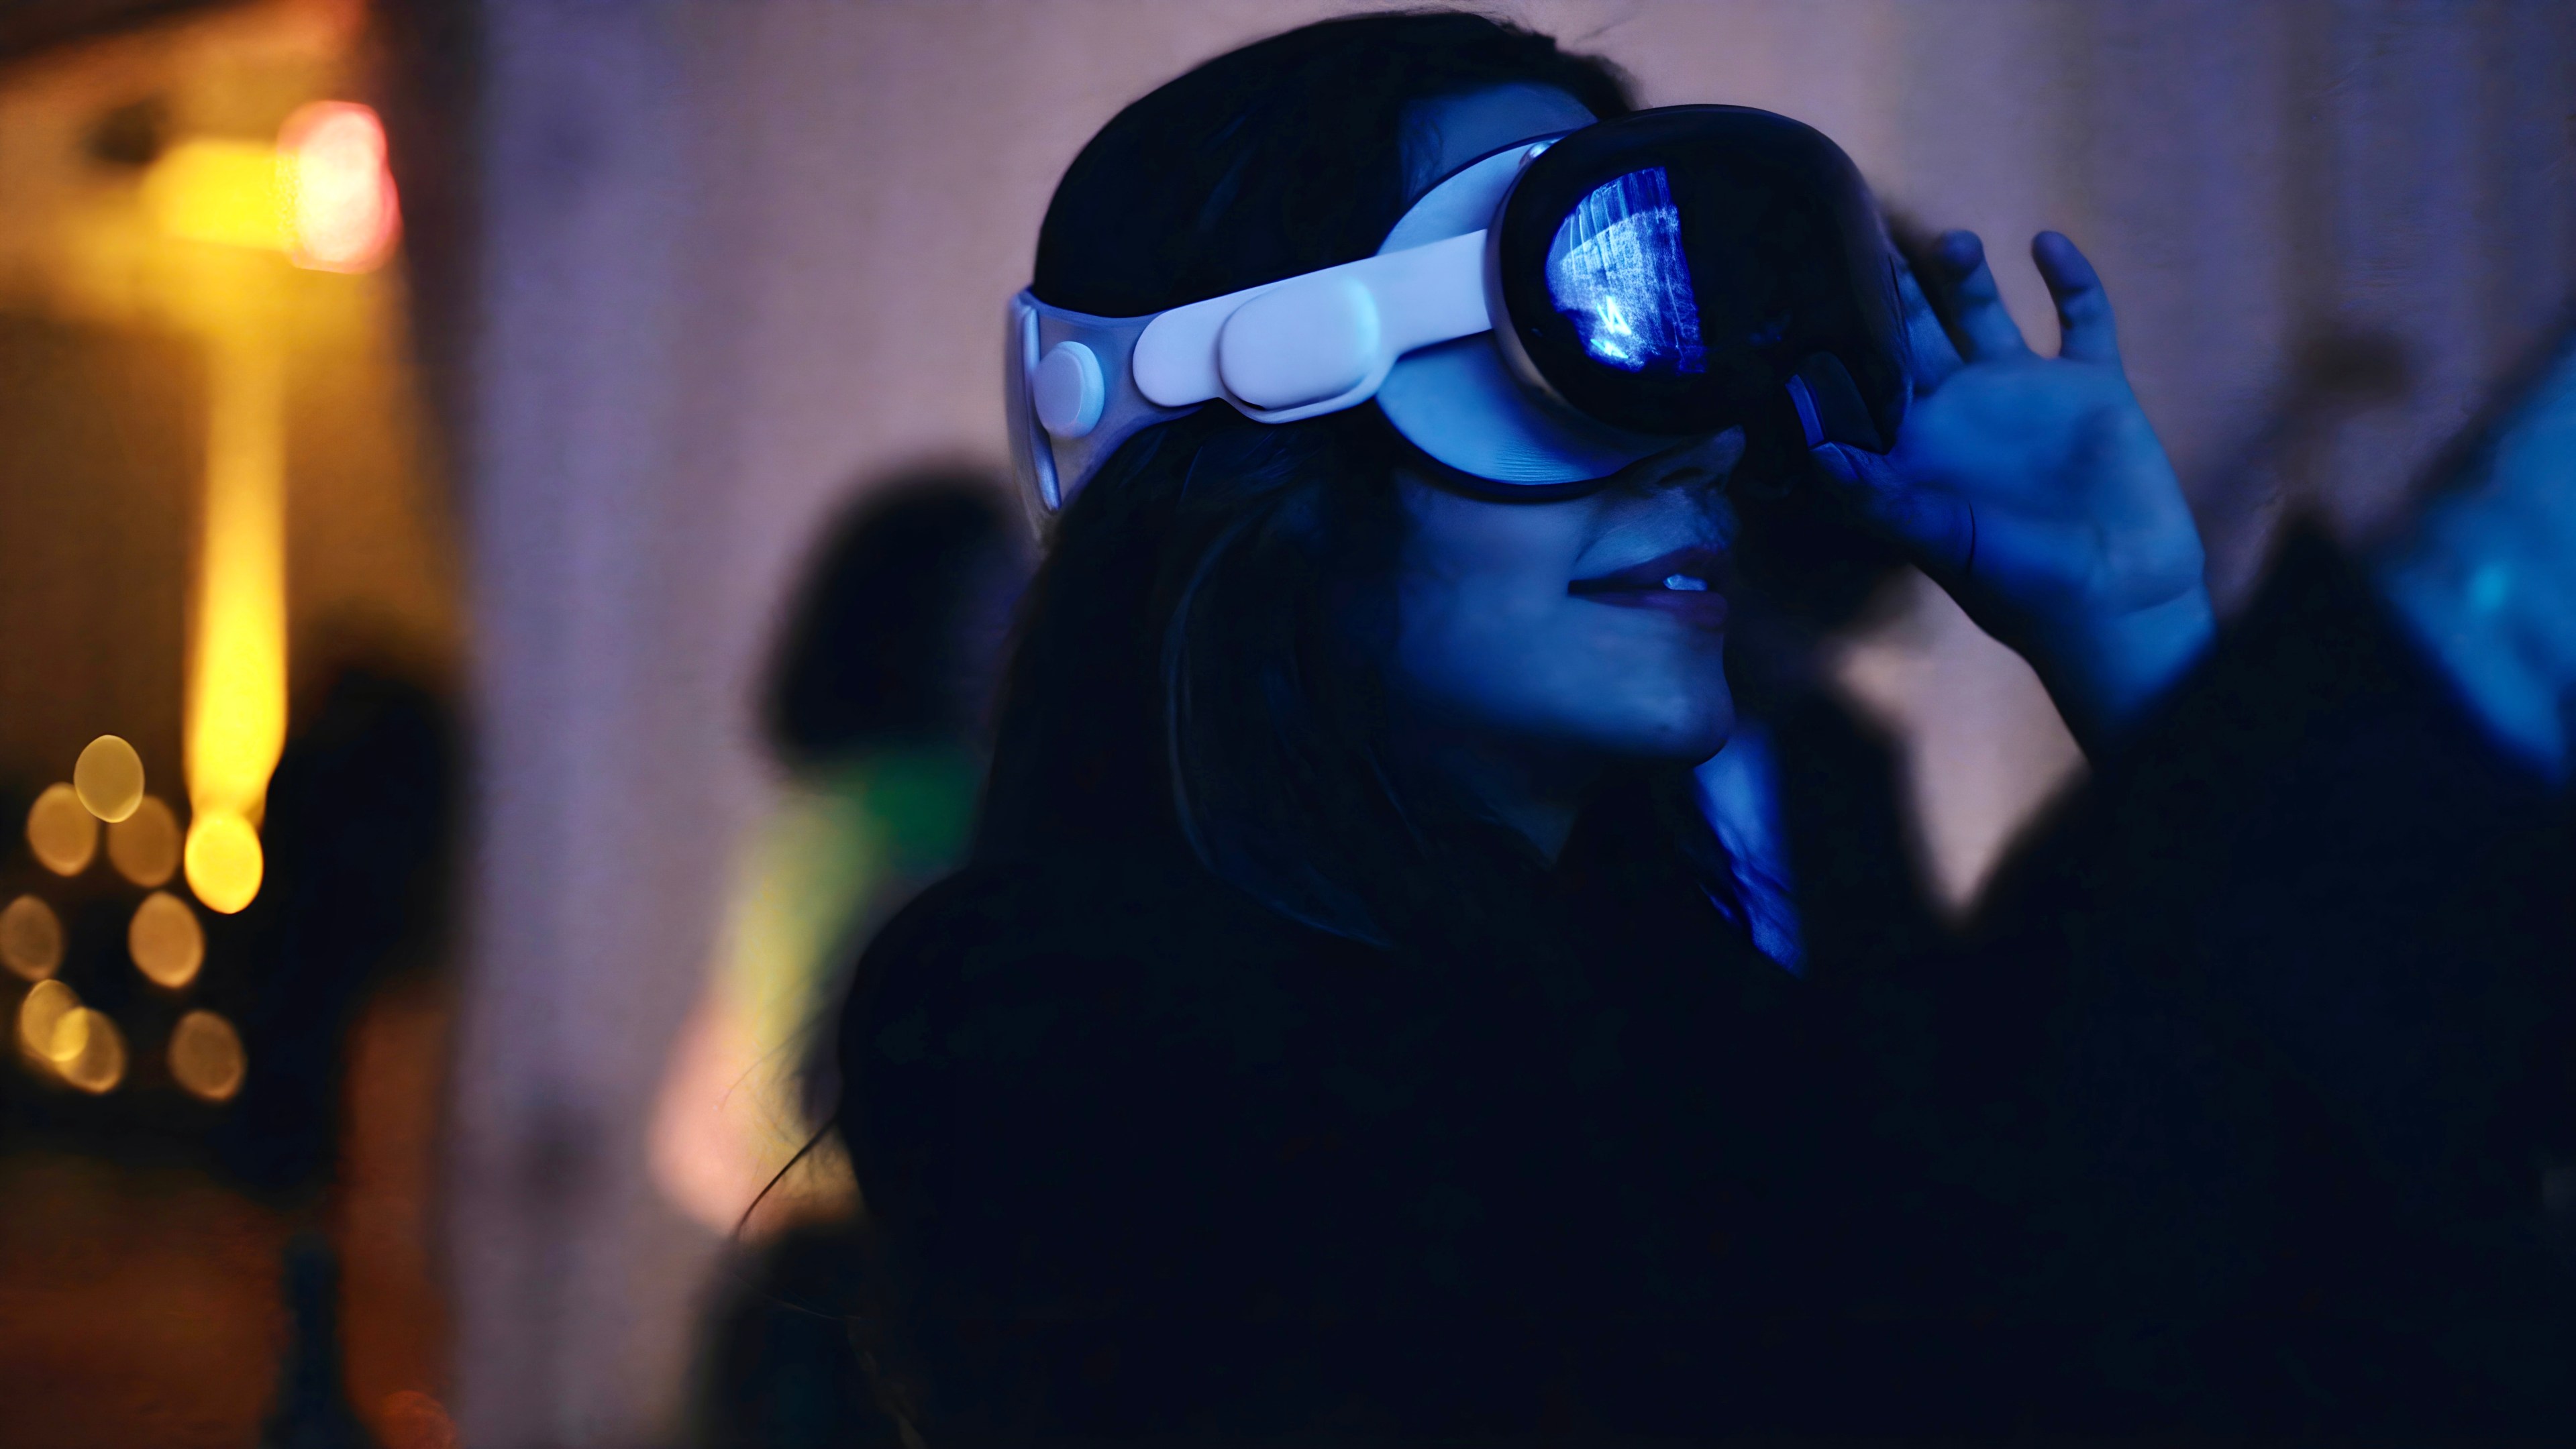 A woman wears an Apple Vision Pro headset, illuminated by glowing blue light, at a party.